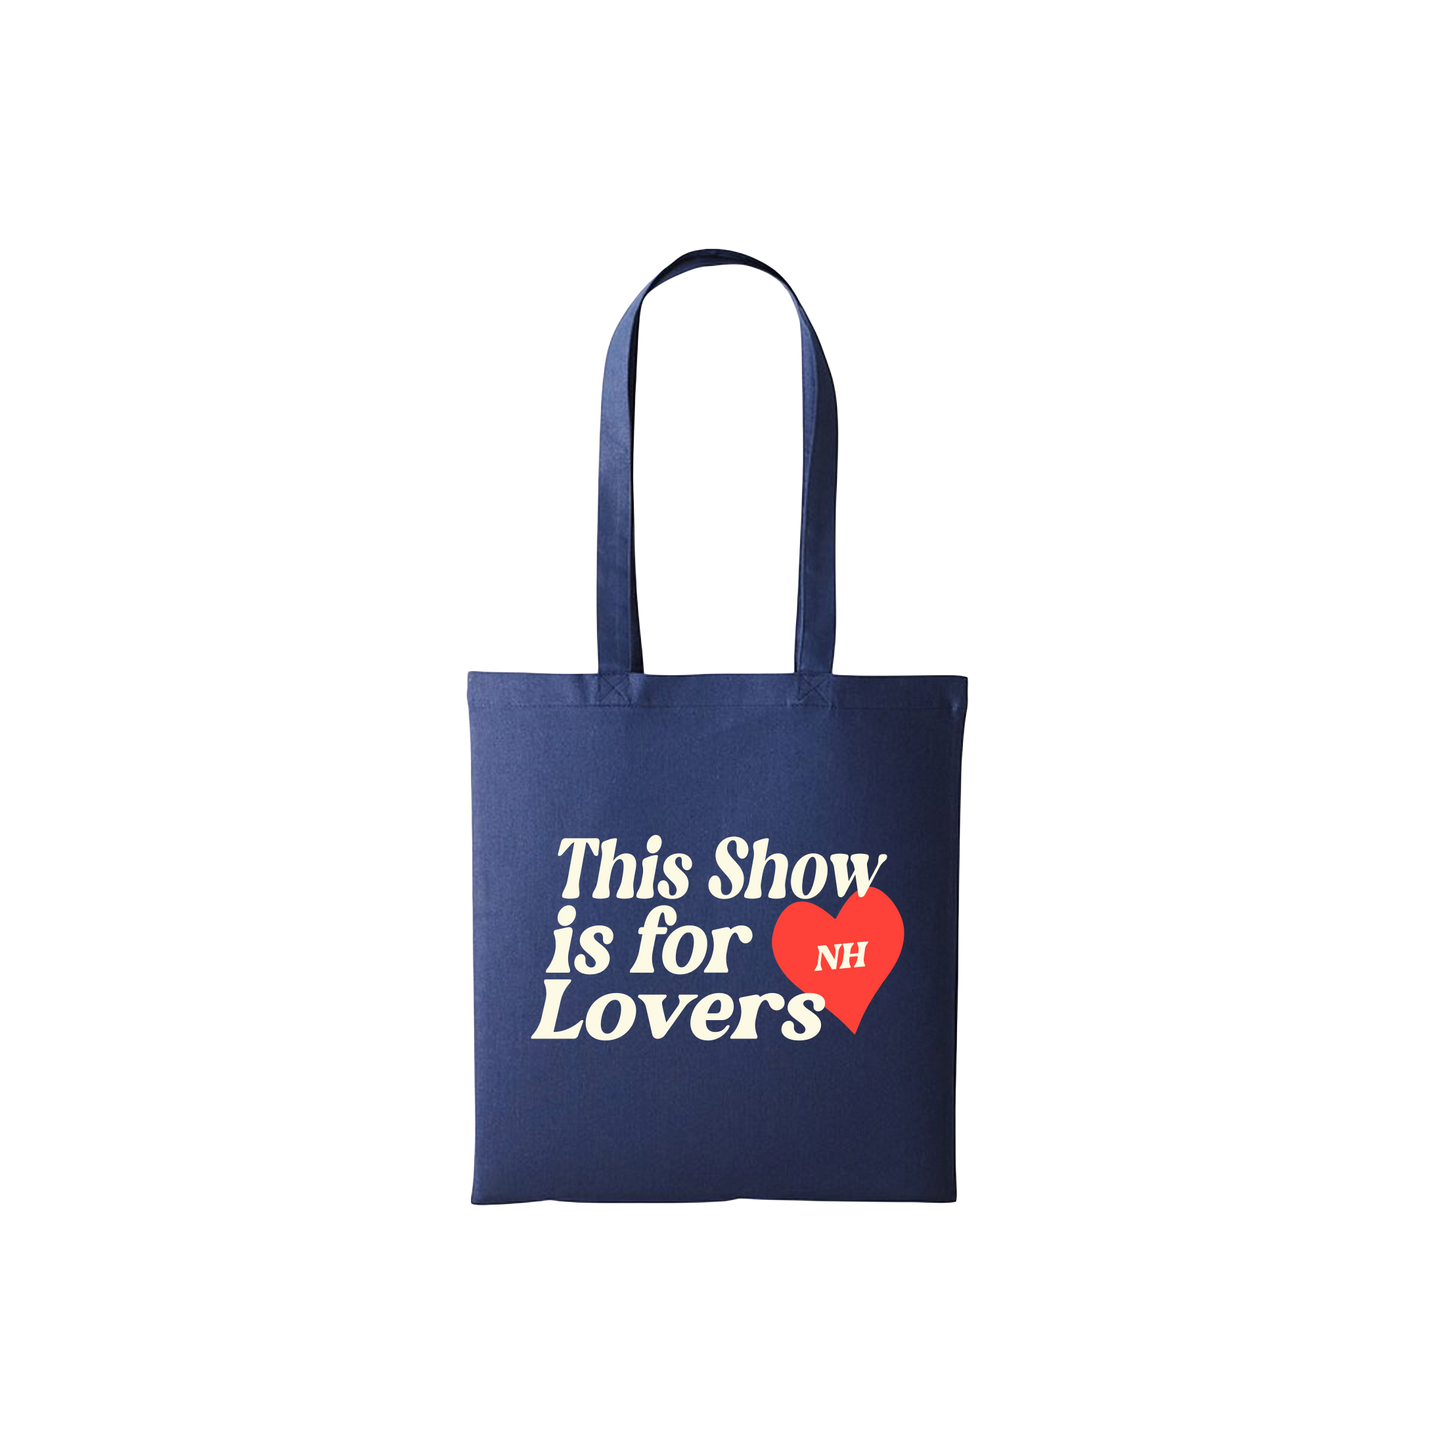 This Show Is For Lovers Tote Bag